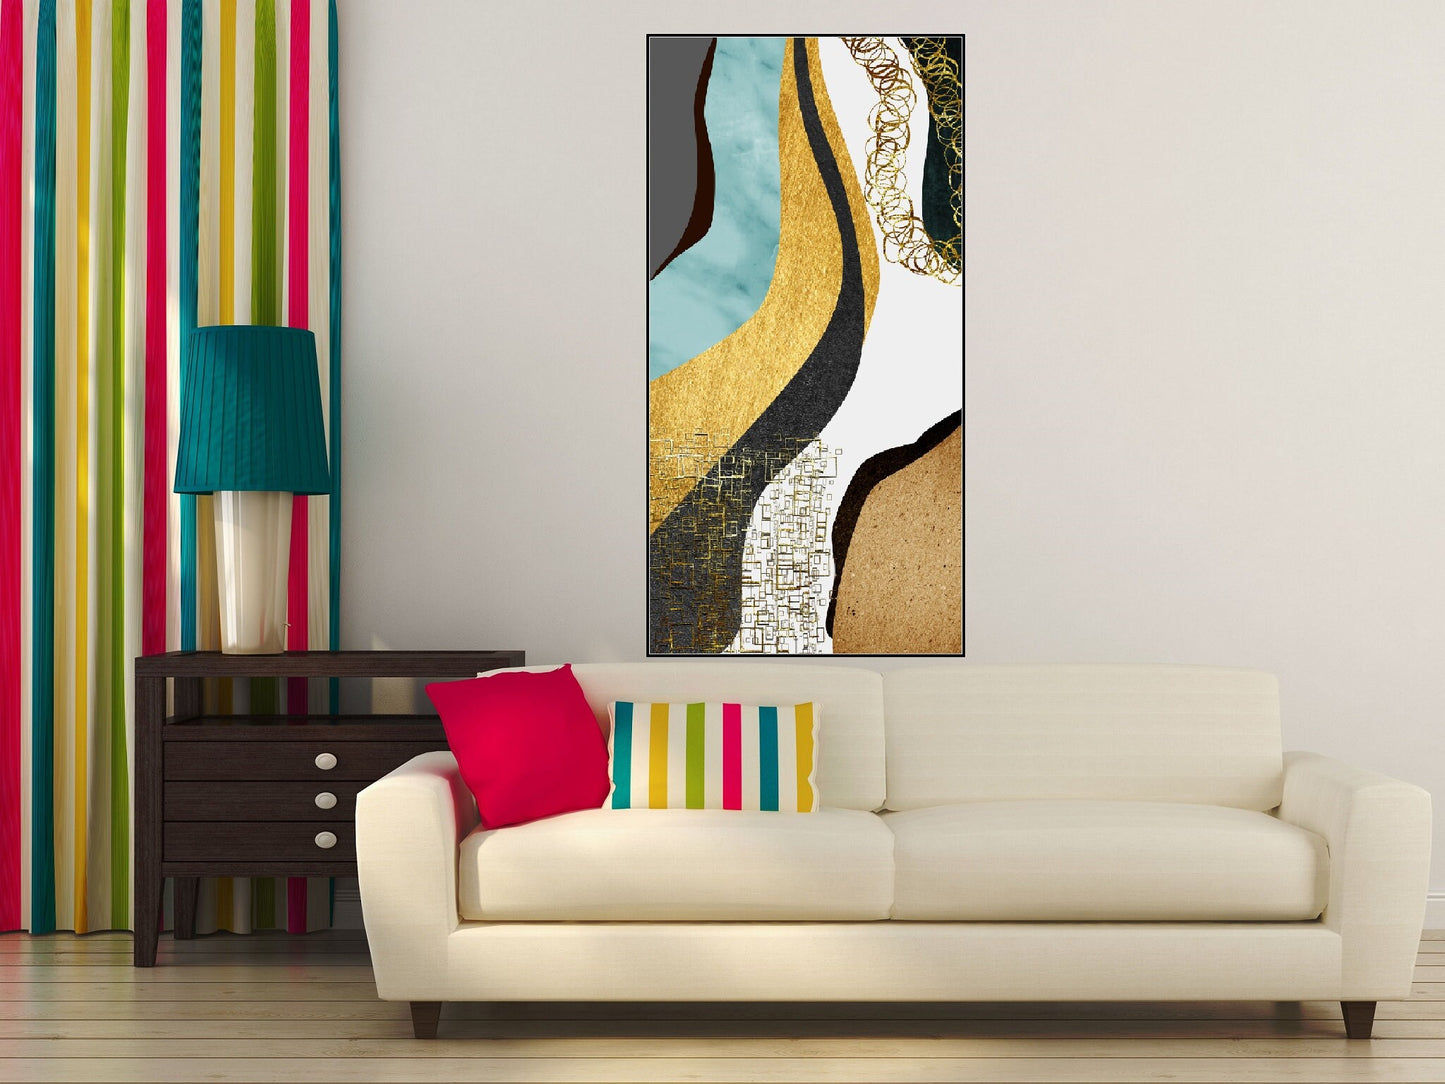 Large abstract floater frame wall art, colorful printable artwork, framed abstract golgen waves canvas artwork, living room hanging wall art